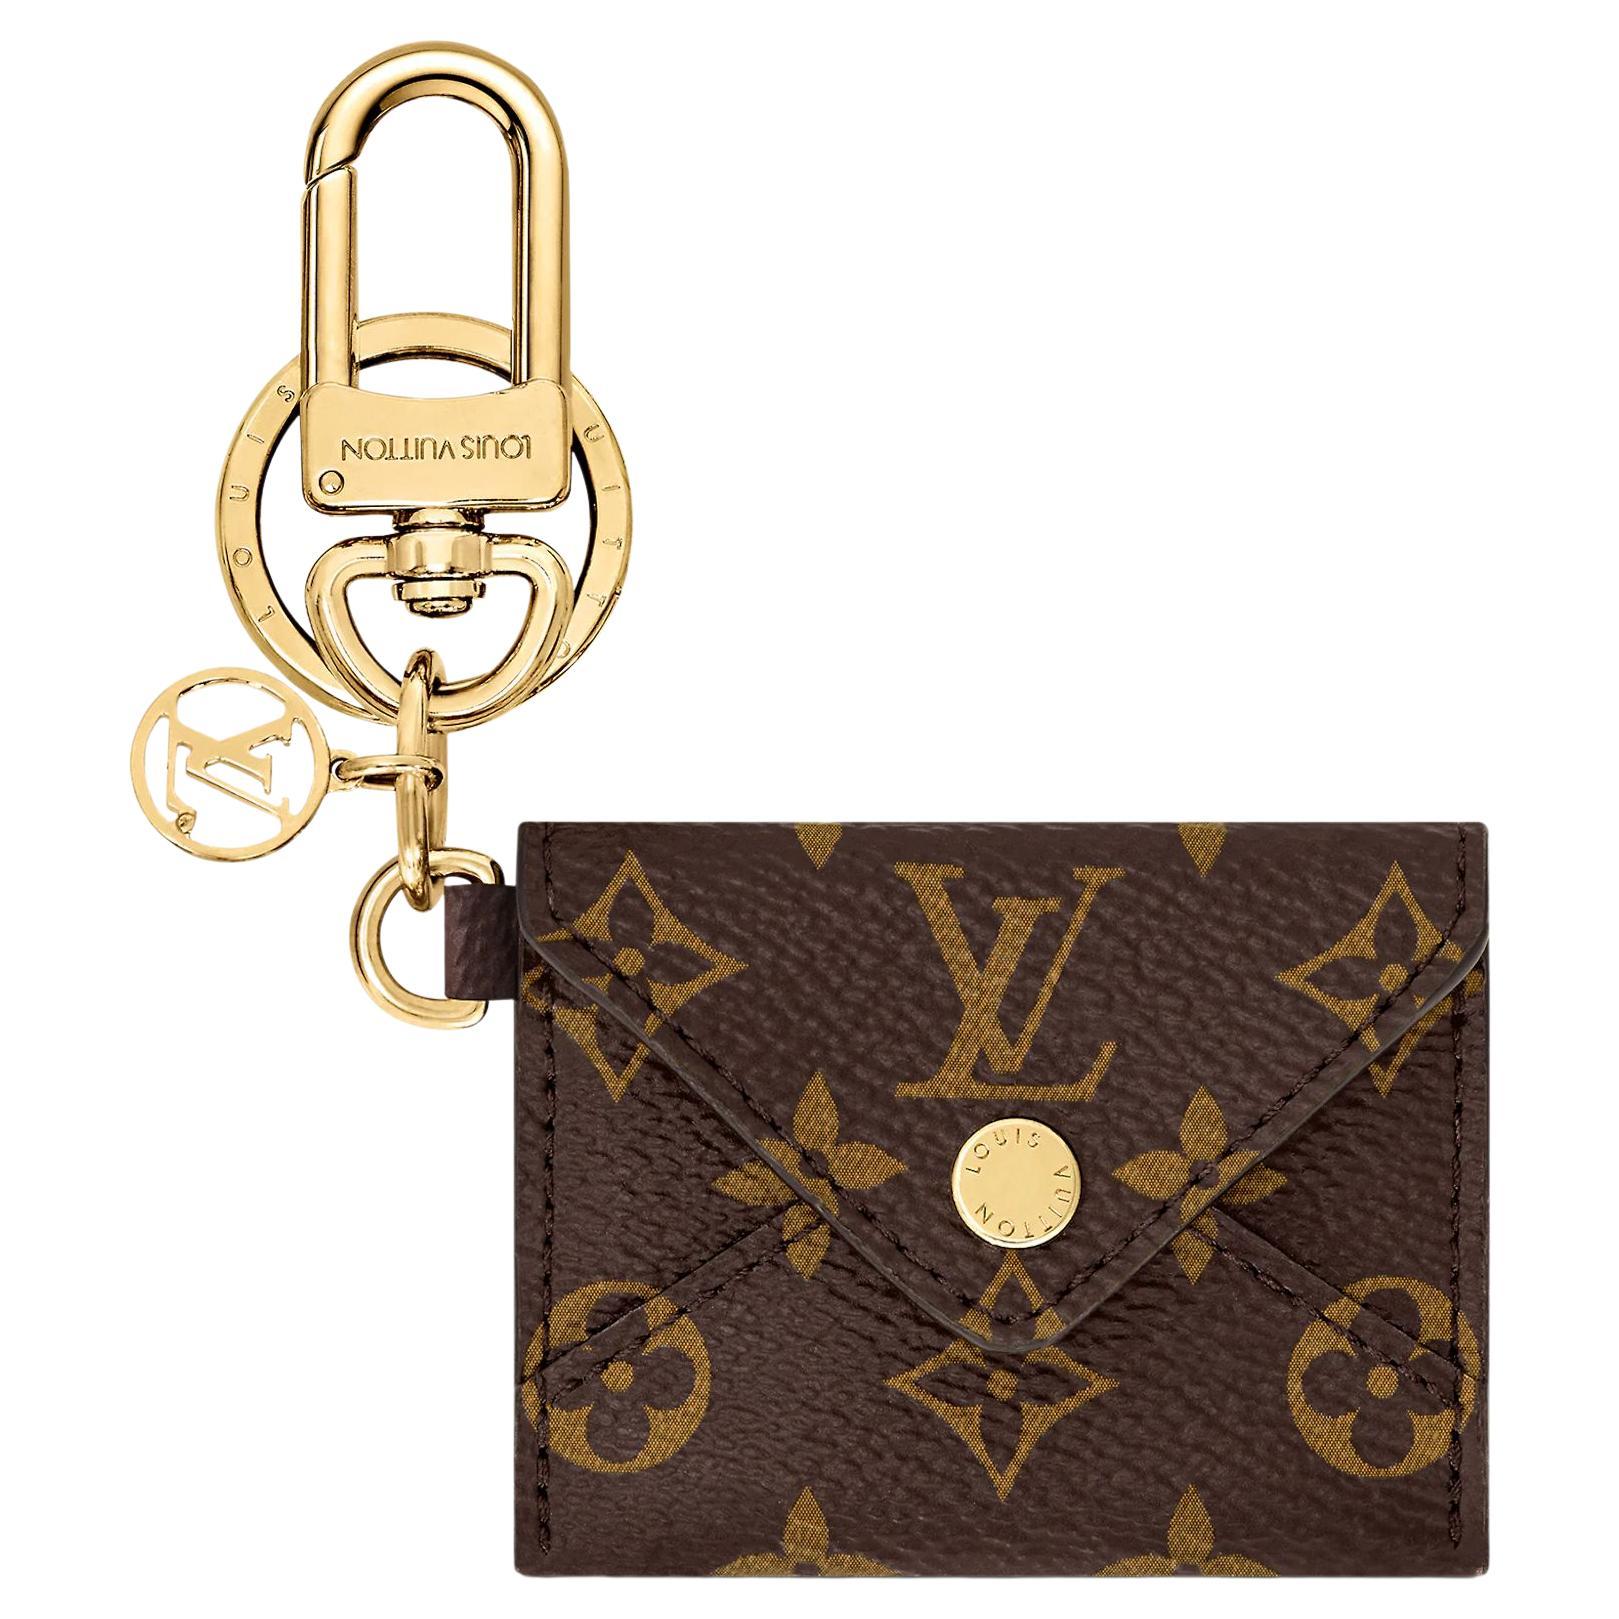 Louis Vuitton Bag charm and Kirigami pouch key ring monogram For Sale